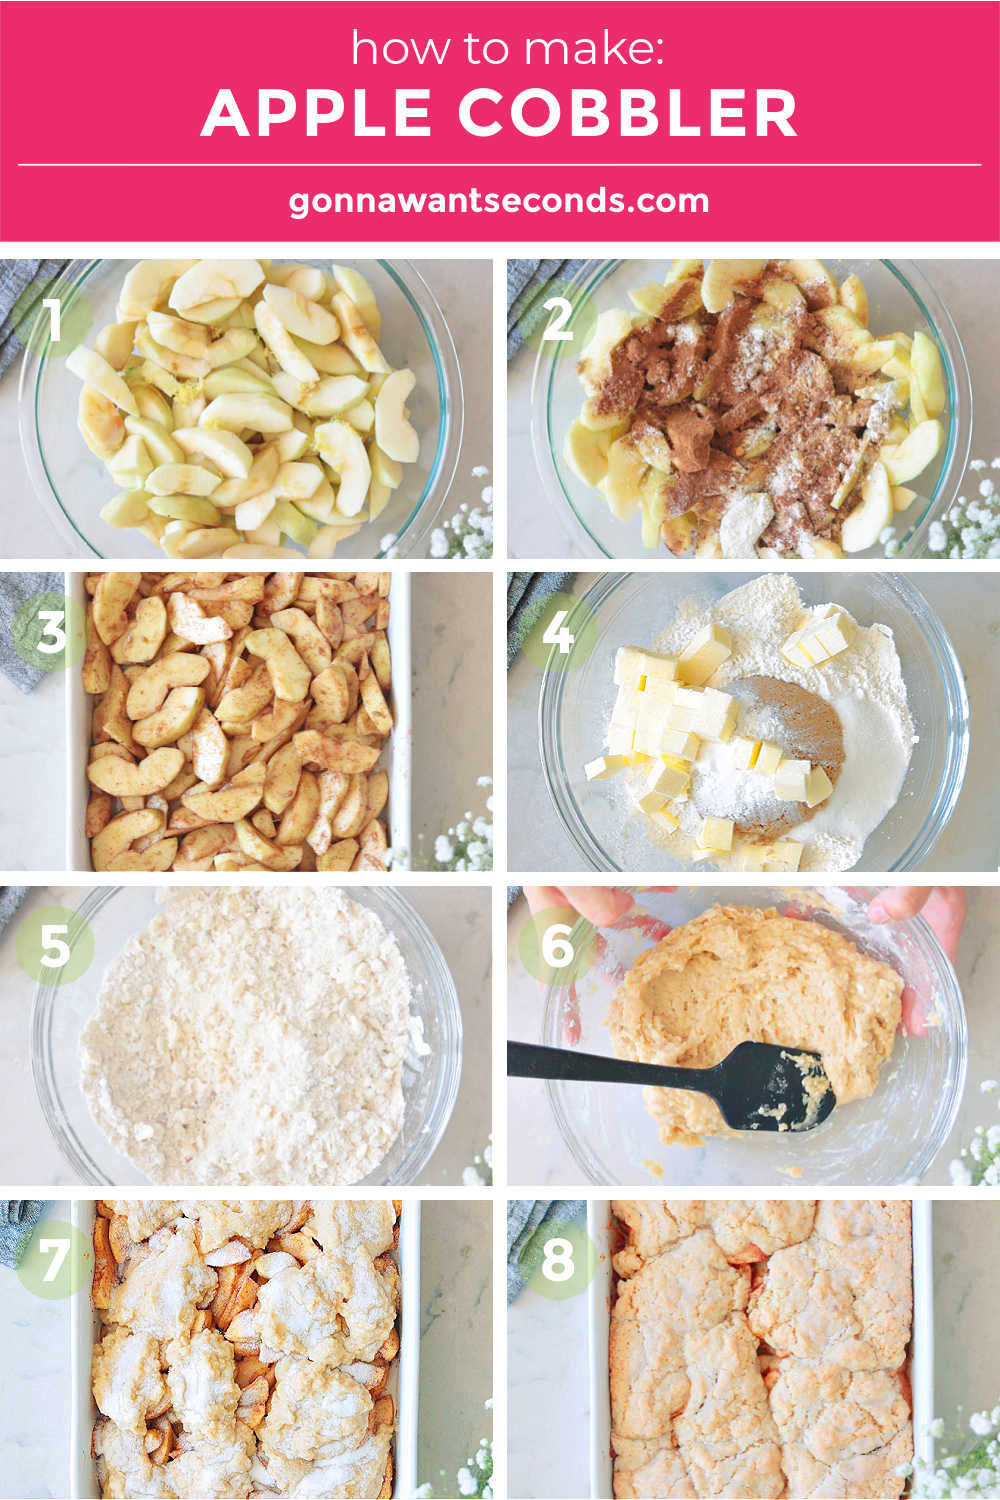 Step by step how to make apple cobbler